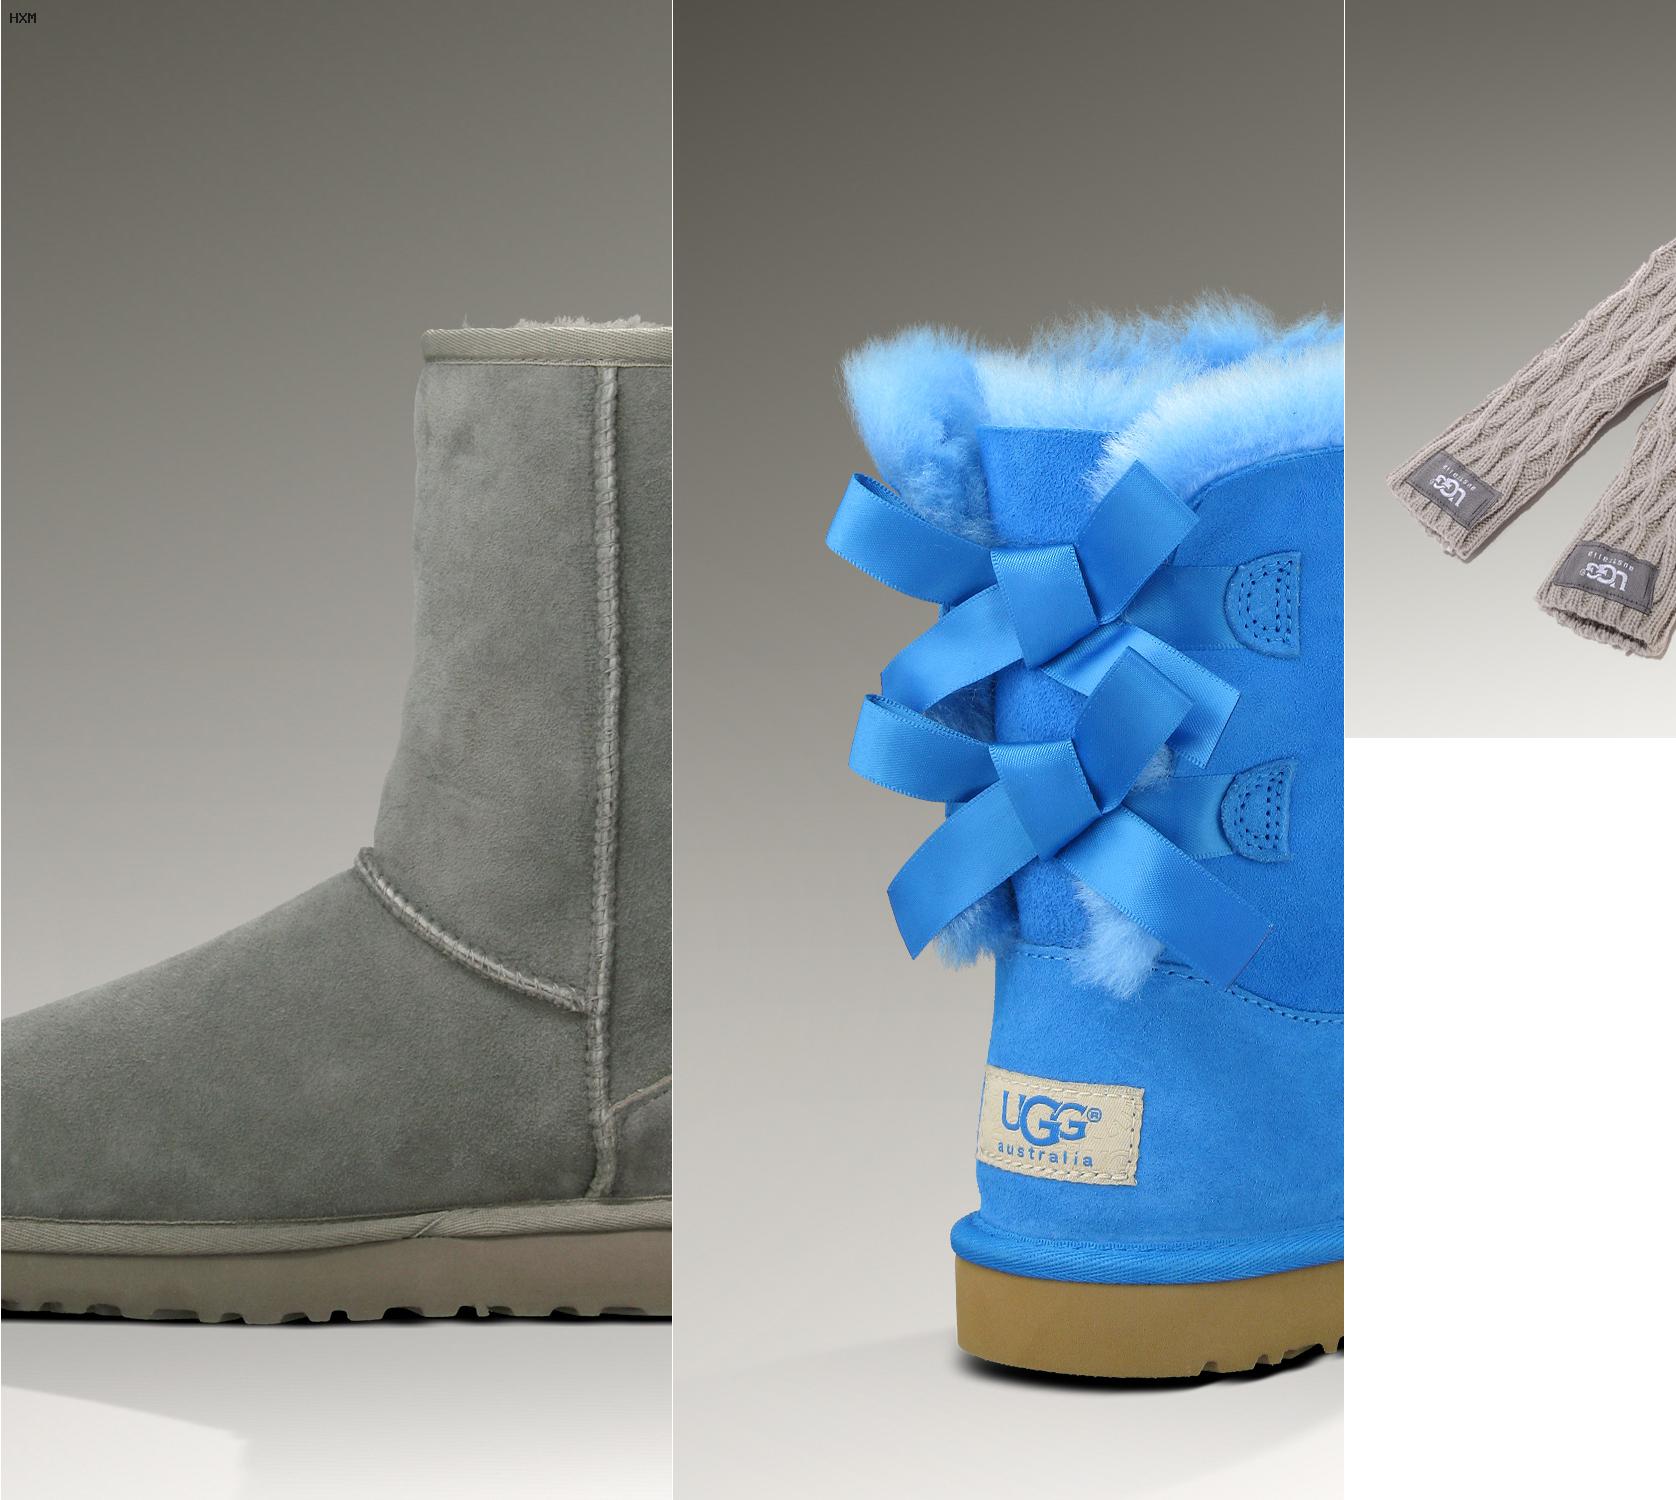 ugg boots on sale at macy